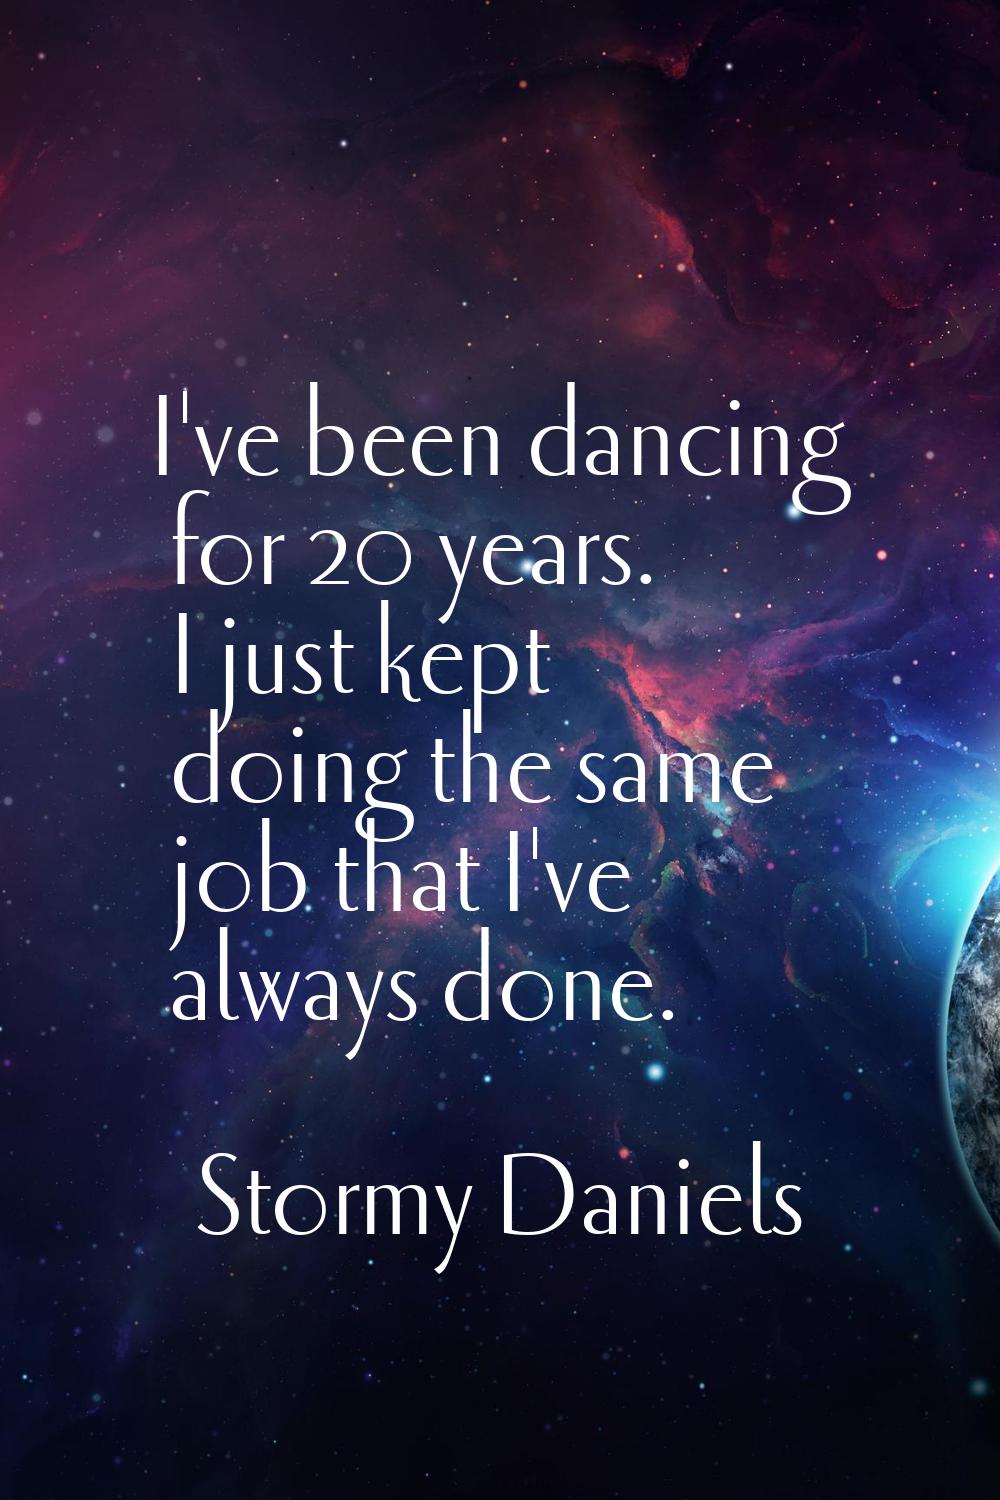 I've been dancing for 20 years. I just kept doing the same job that I've always done.